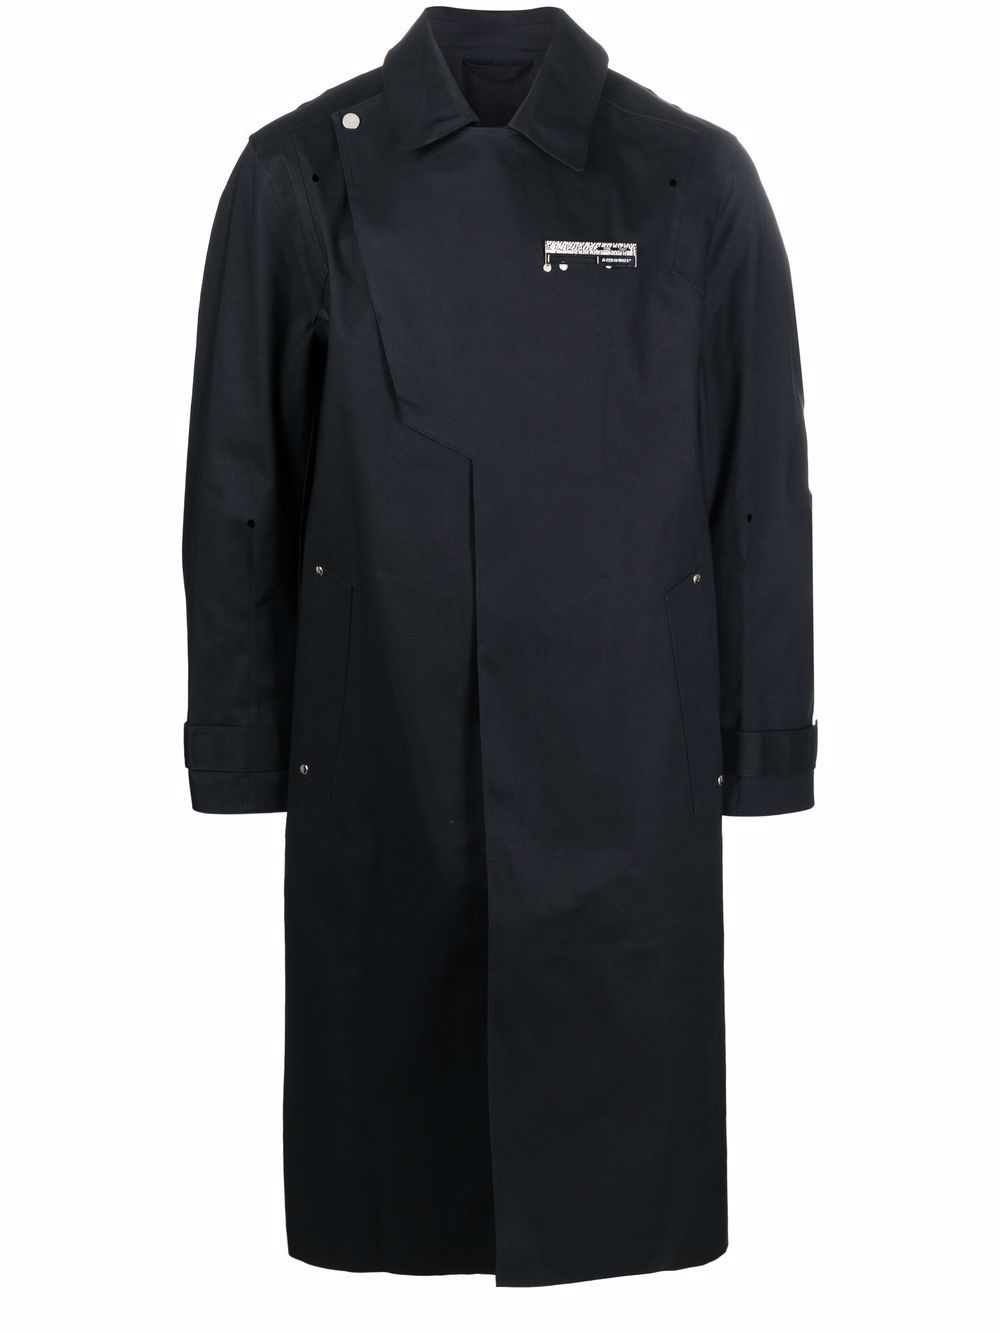 A-COLD-WALL* logo-badge longline trench coat - Black von A-COLD-WALL*